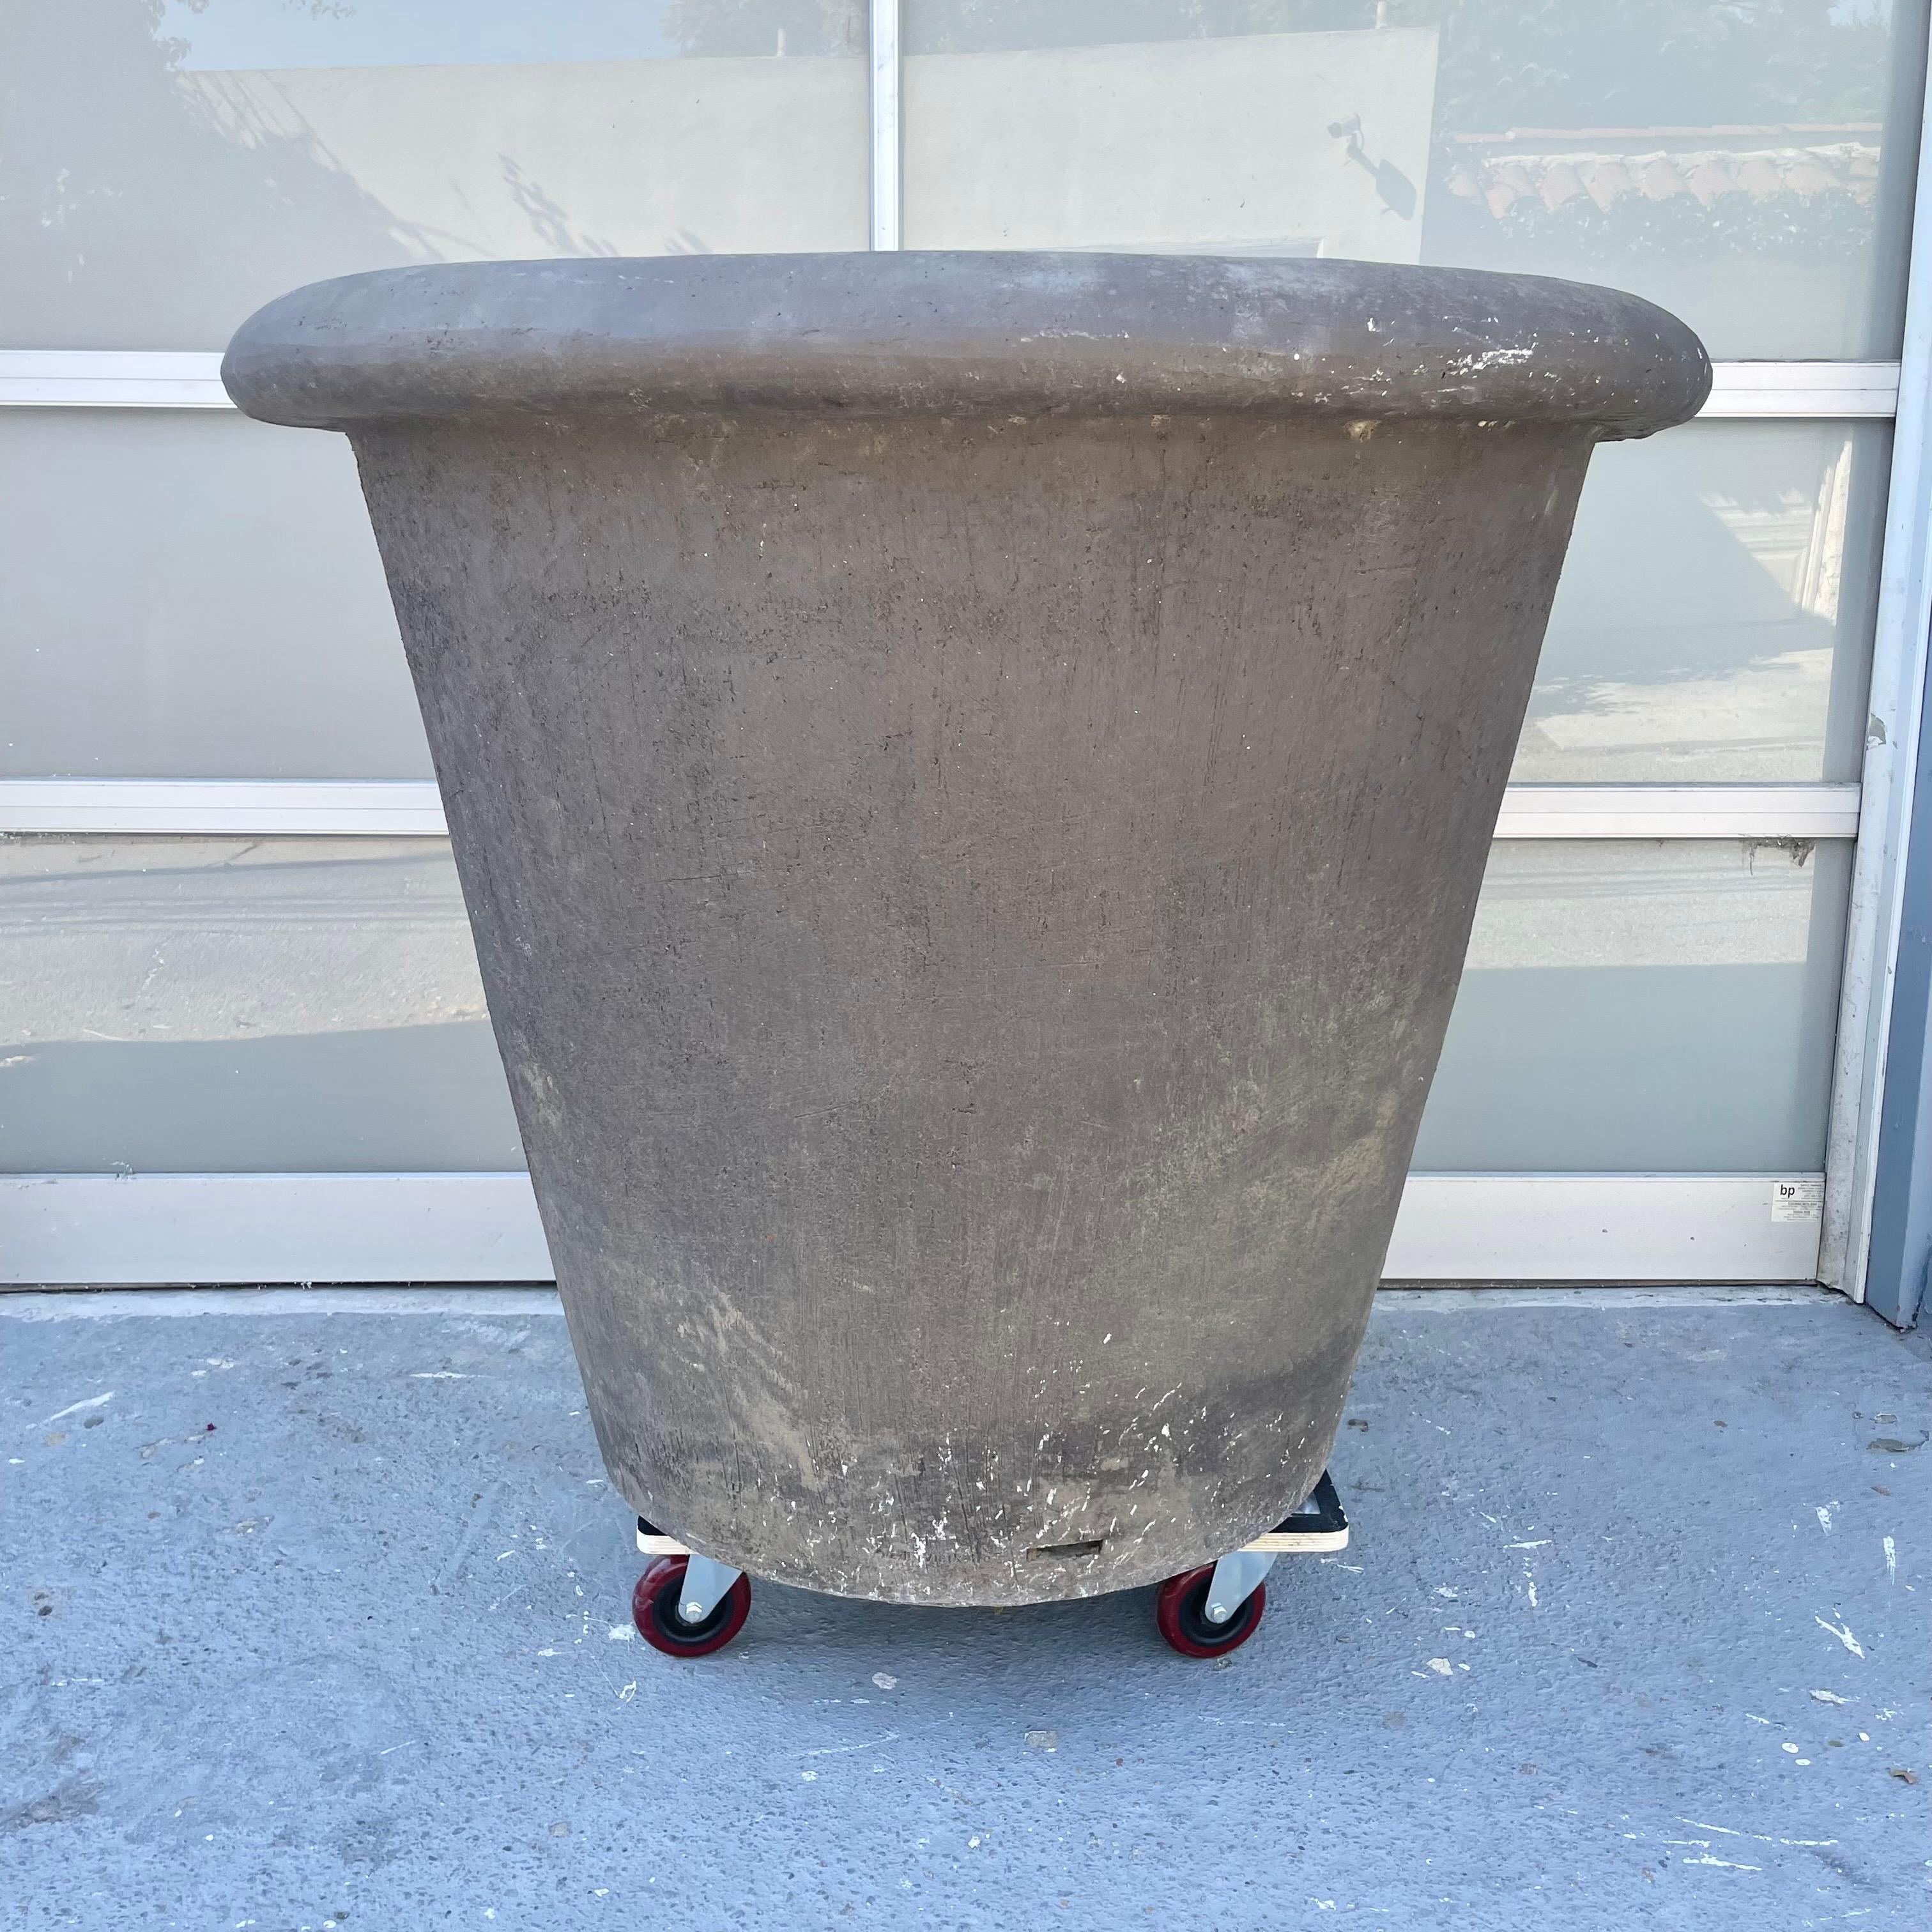 Monumental French terracotta planters in a charcoal grey finish. Just under 4 feet in diameter. Tapered down to the base giving it a classic and pronounced conical shape. Extremely pronounced and substantial rim around the top of the planter as well